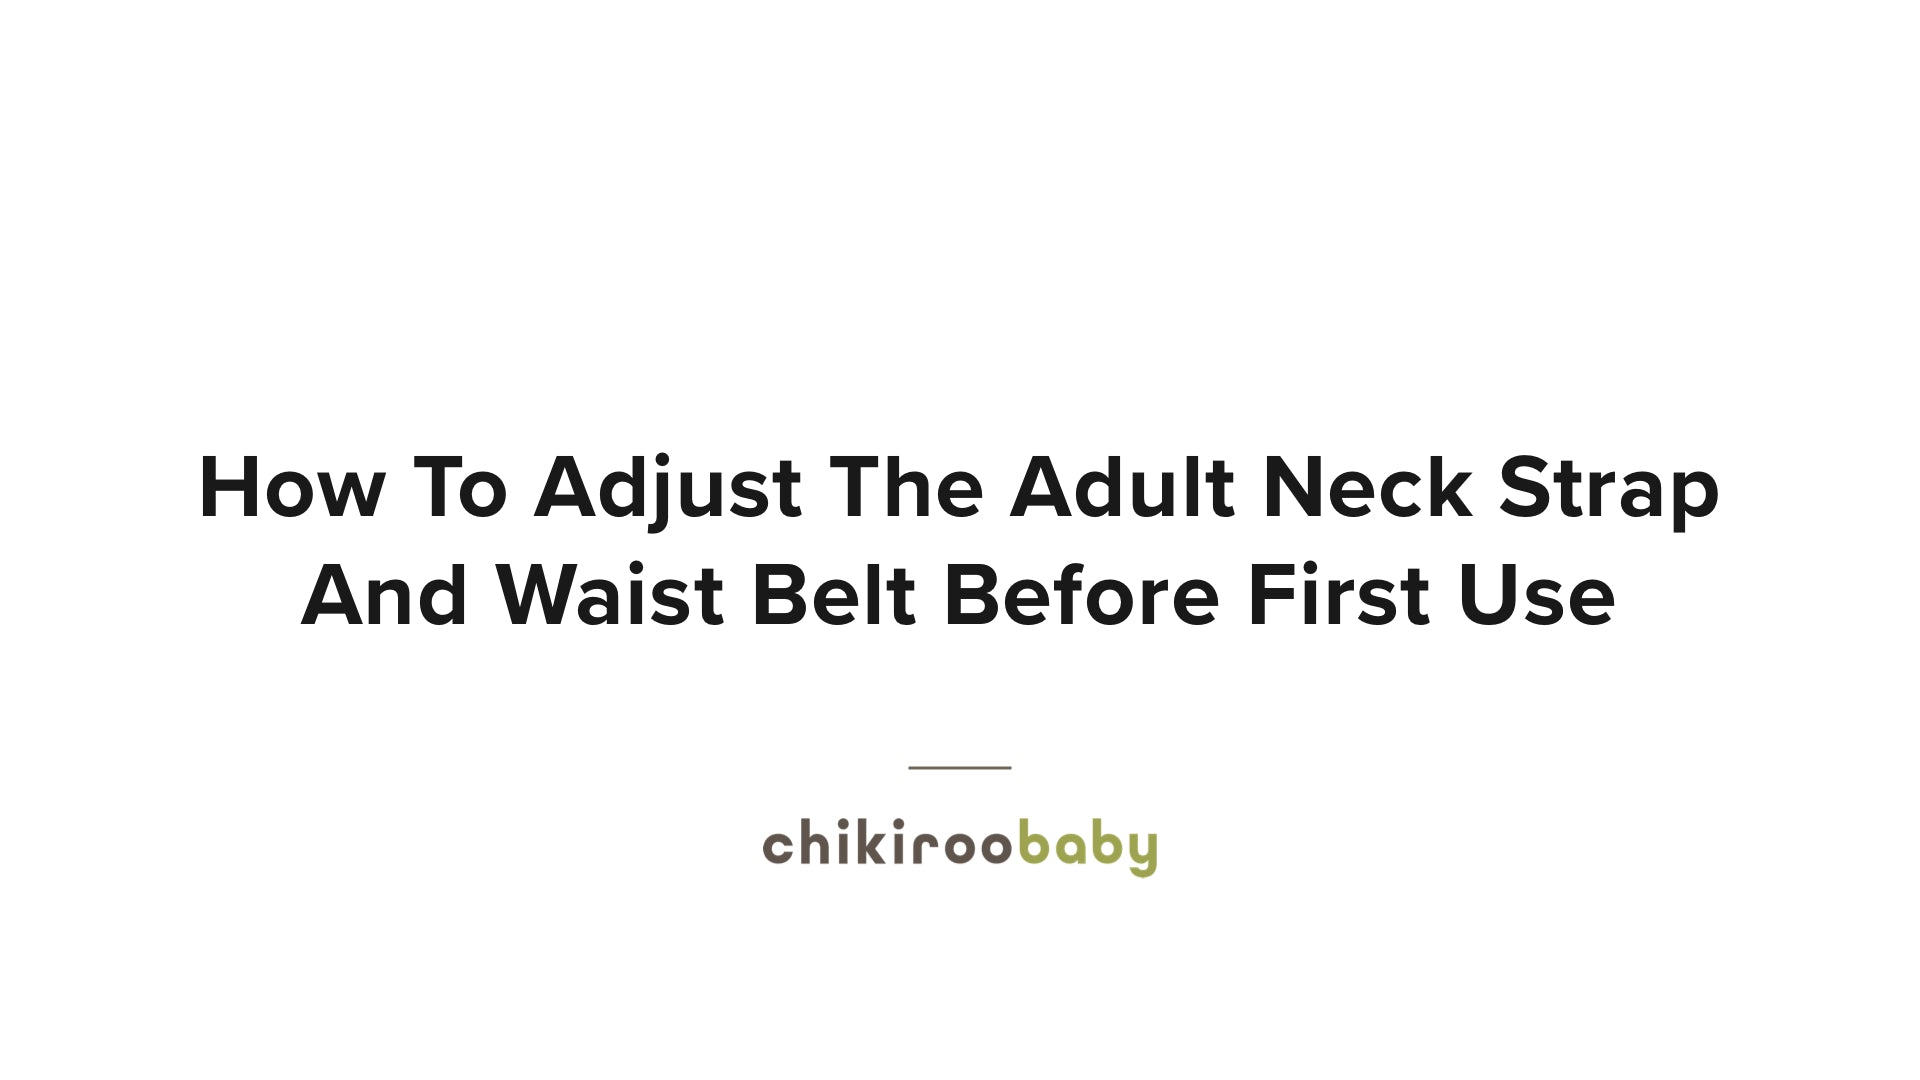 Load video: How to adjust the adult neck strap and waist belt before first use | Chikiroo Baby